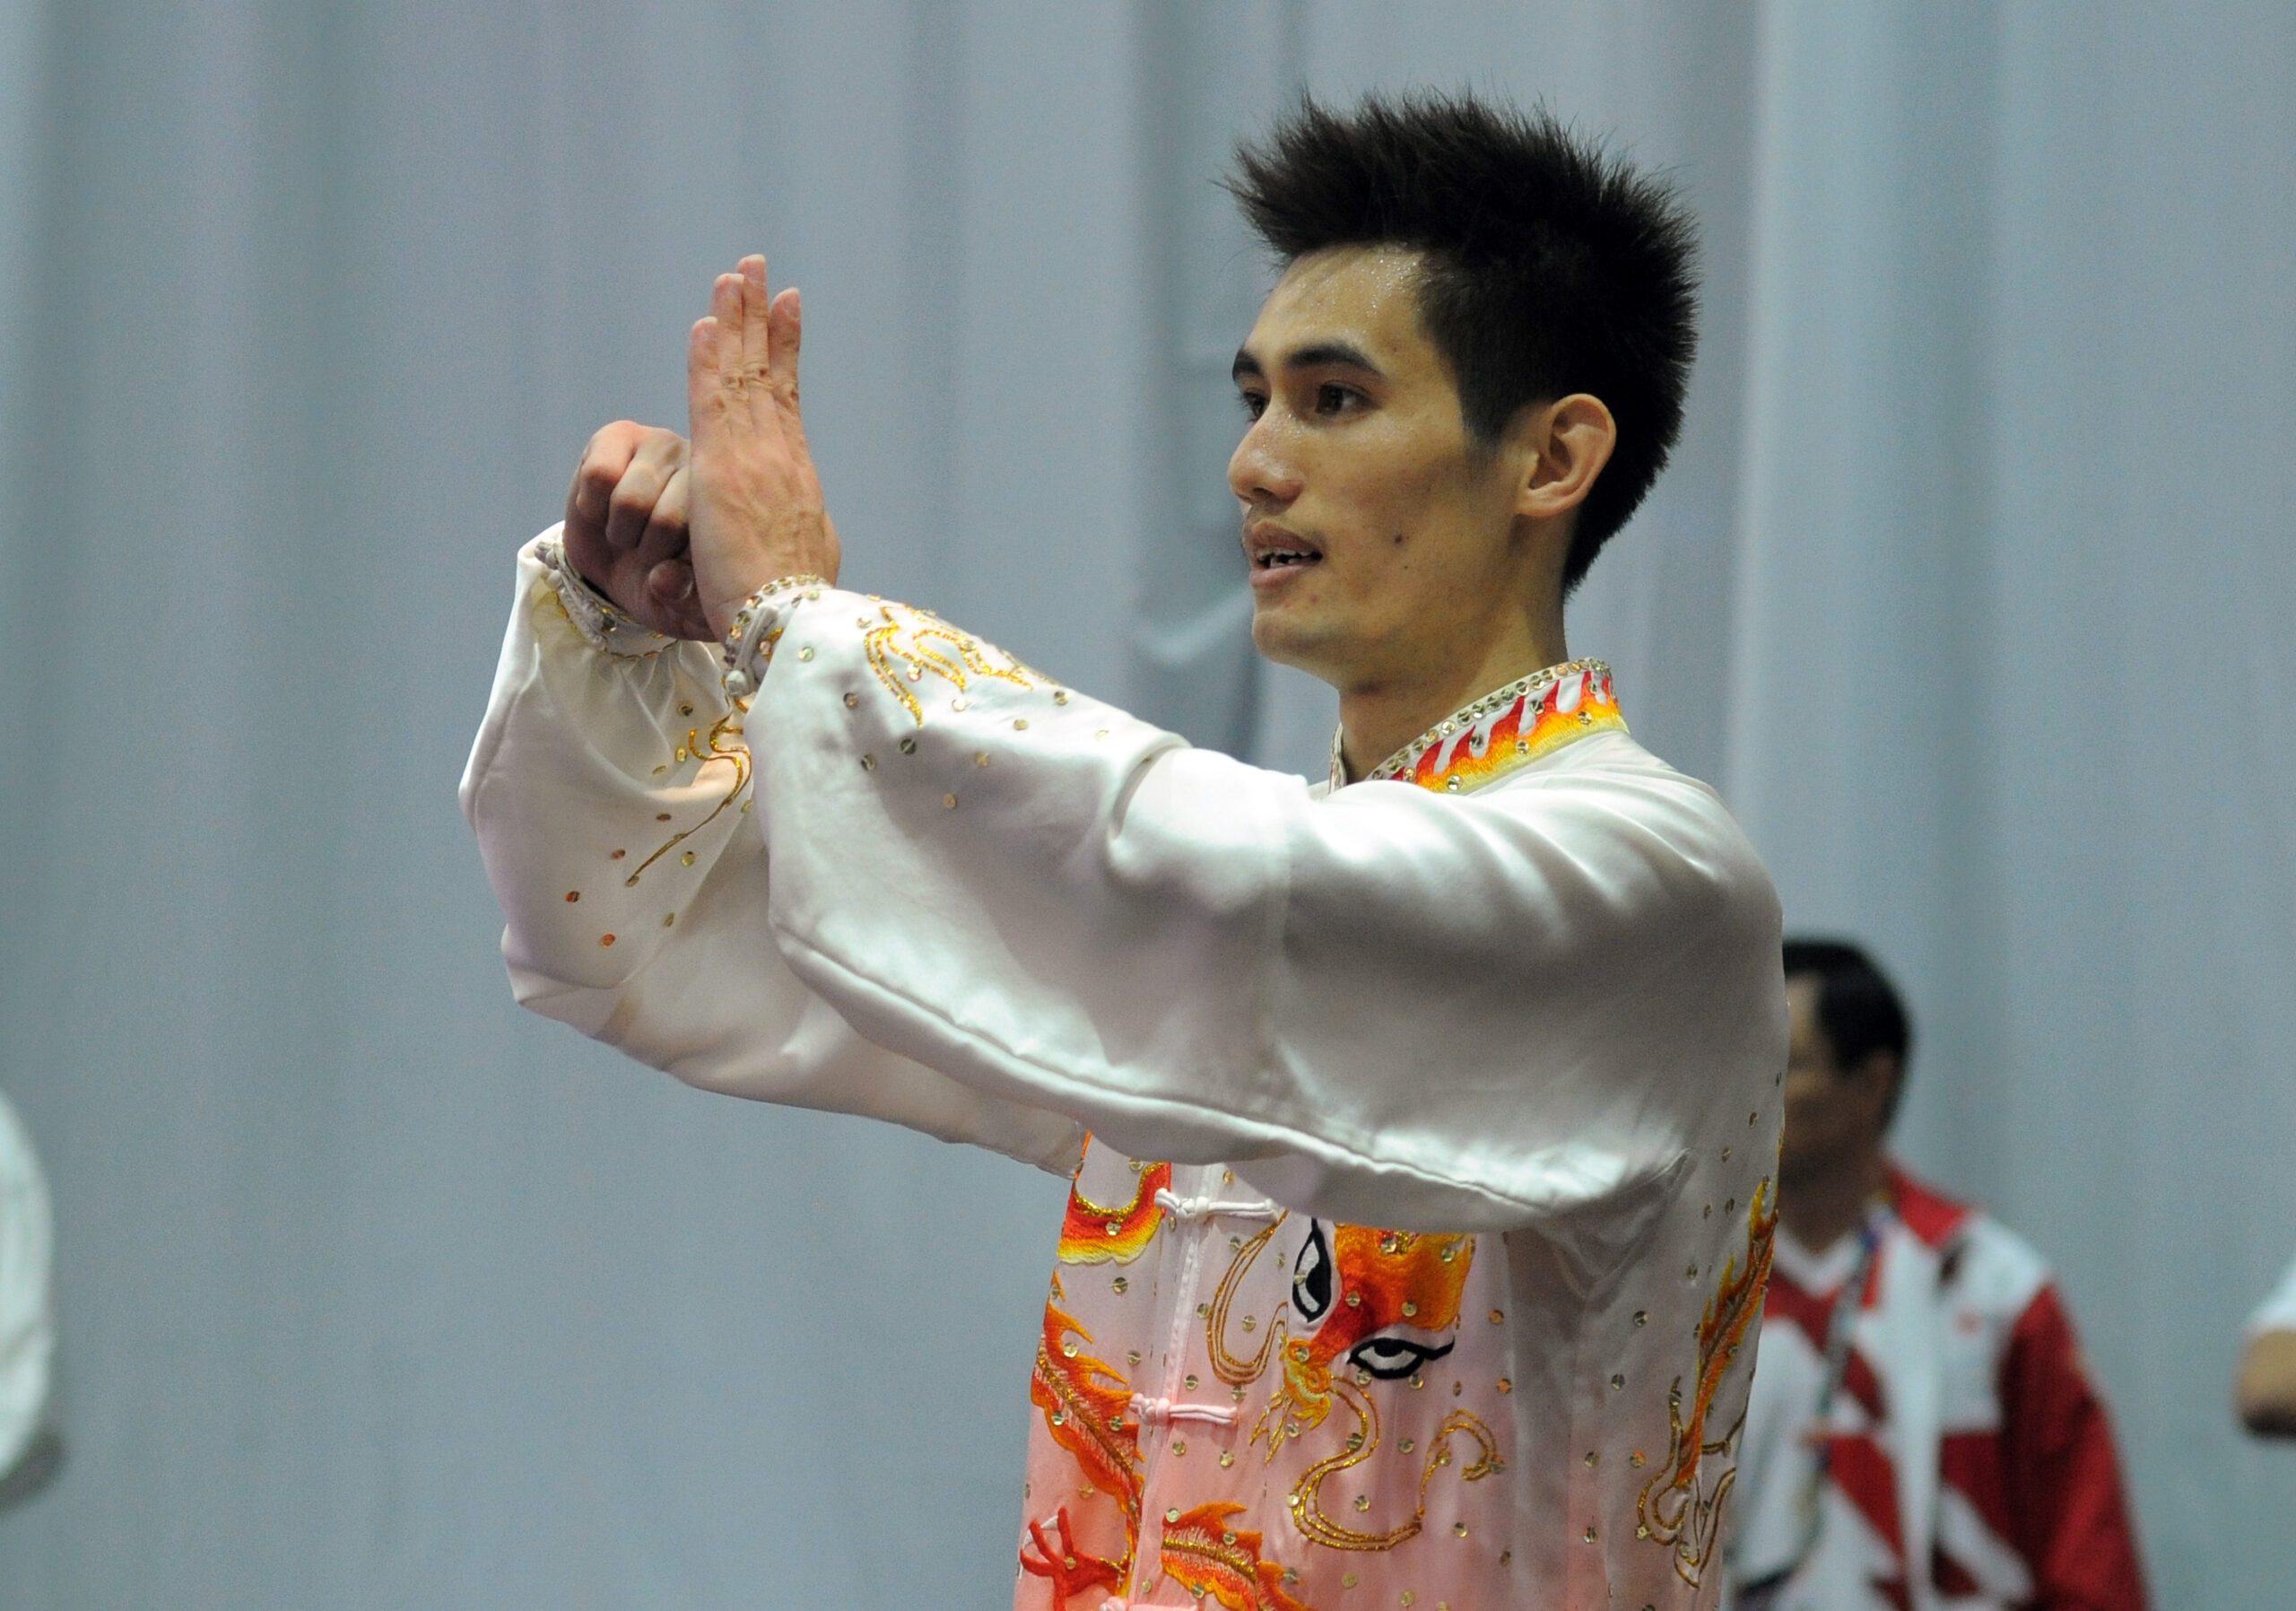 Parantac’s wushu gold medal hopes dashed by errors